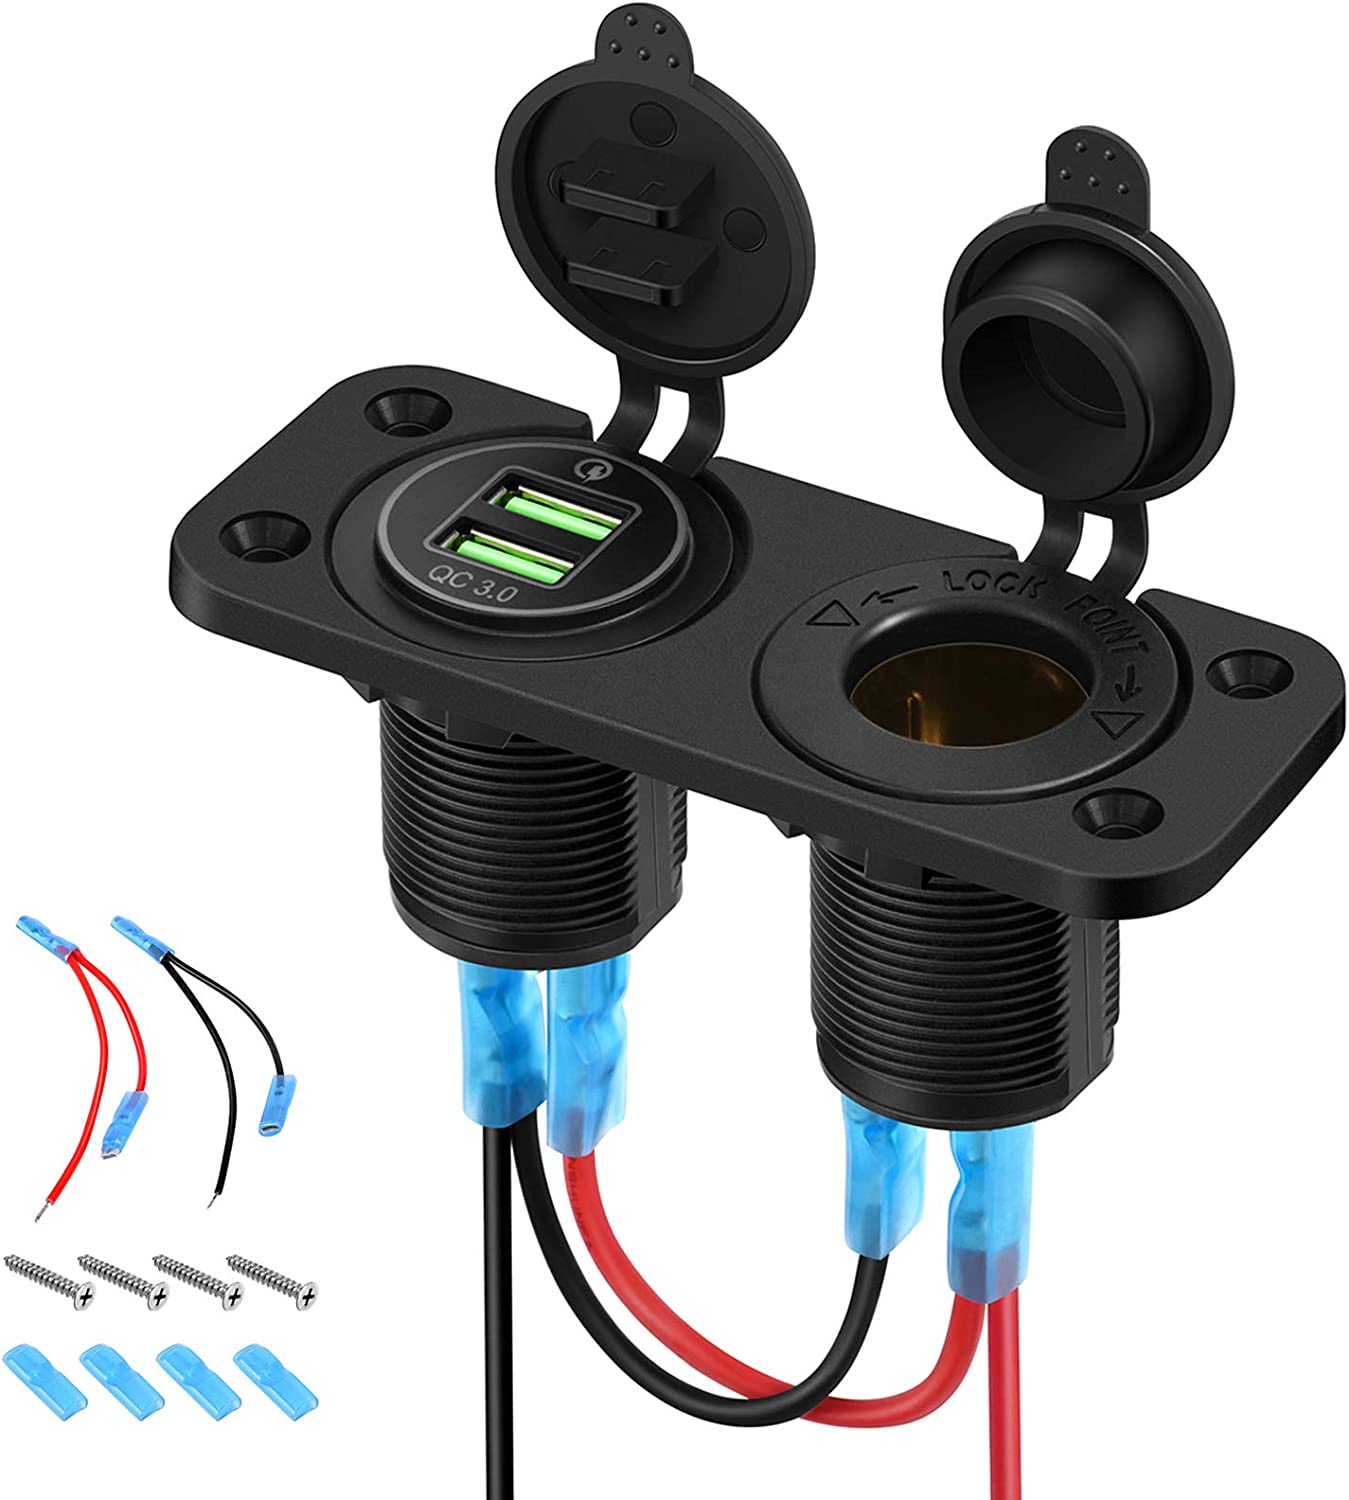 Power Your Marine Adventures with Kohree 12V Outlet with USB